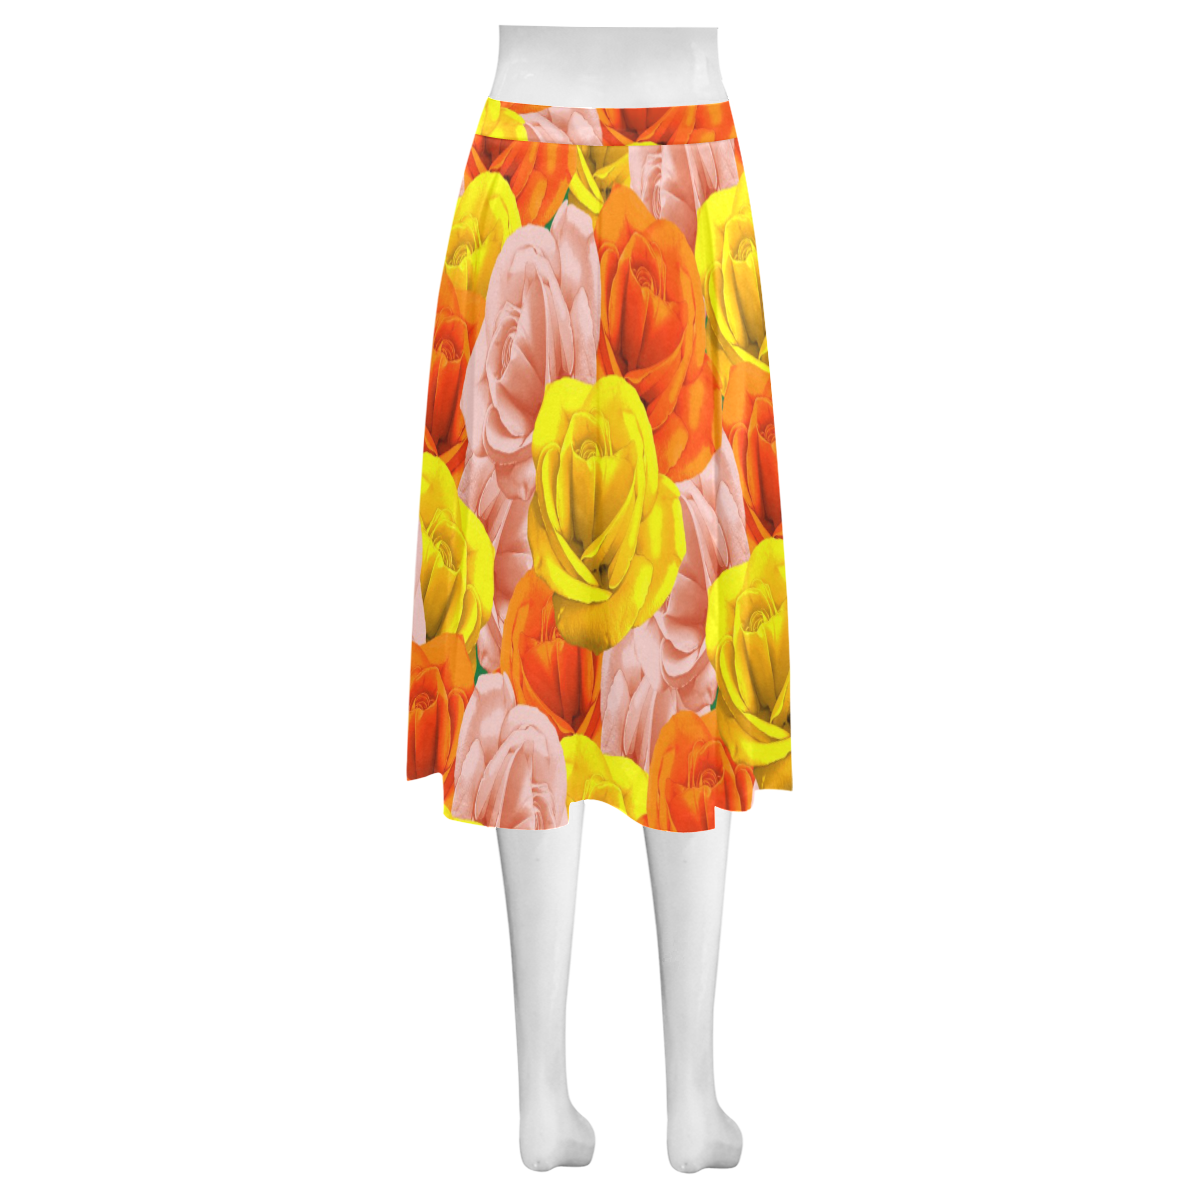 Roses Pastel Colors Floral Collage Mnemosyne Women's Crepe Skirt (Model D16)